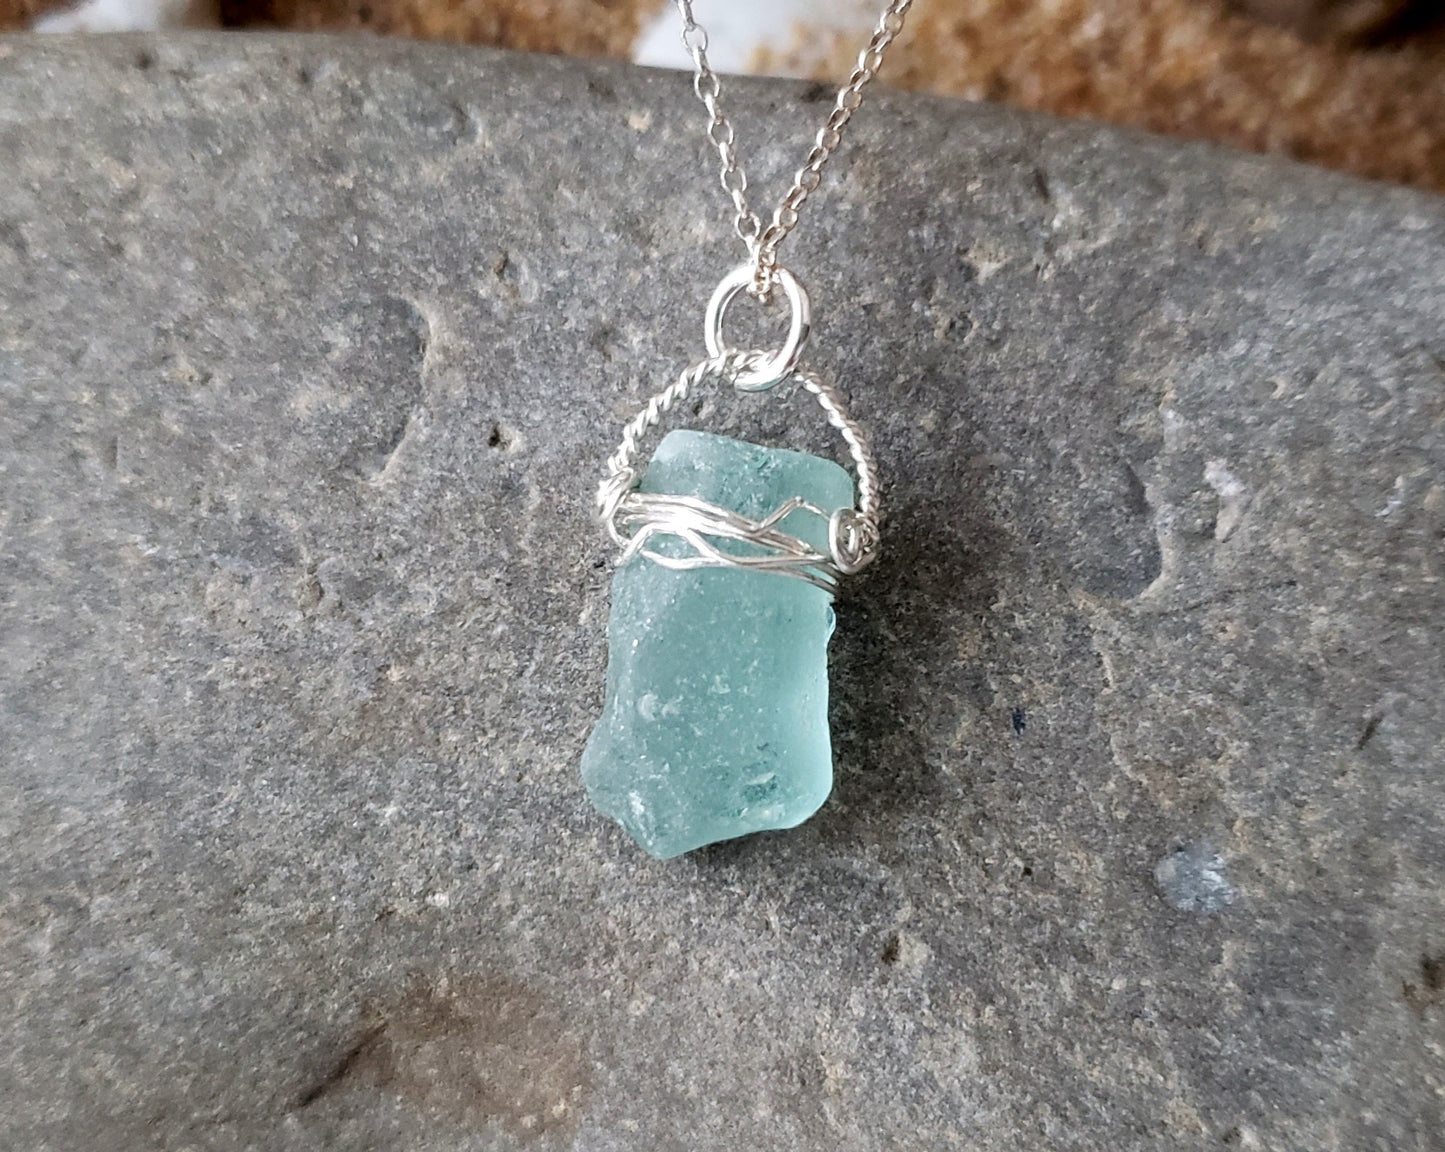 Aqua Blue Beach Glass Serenity Pendant Necklace, full view of pendant on a grey stone background